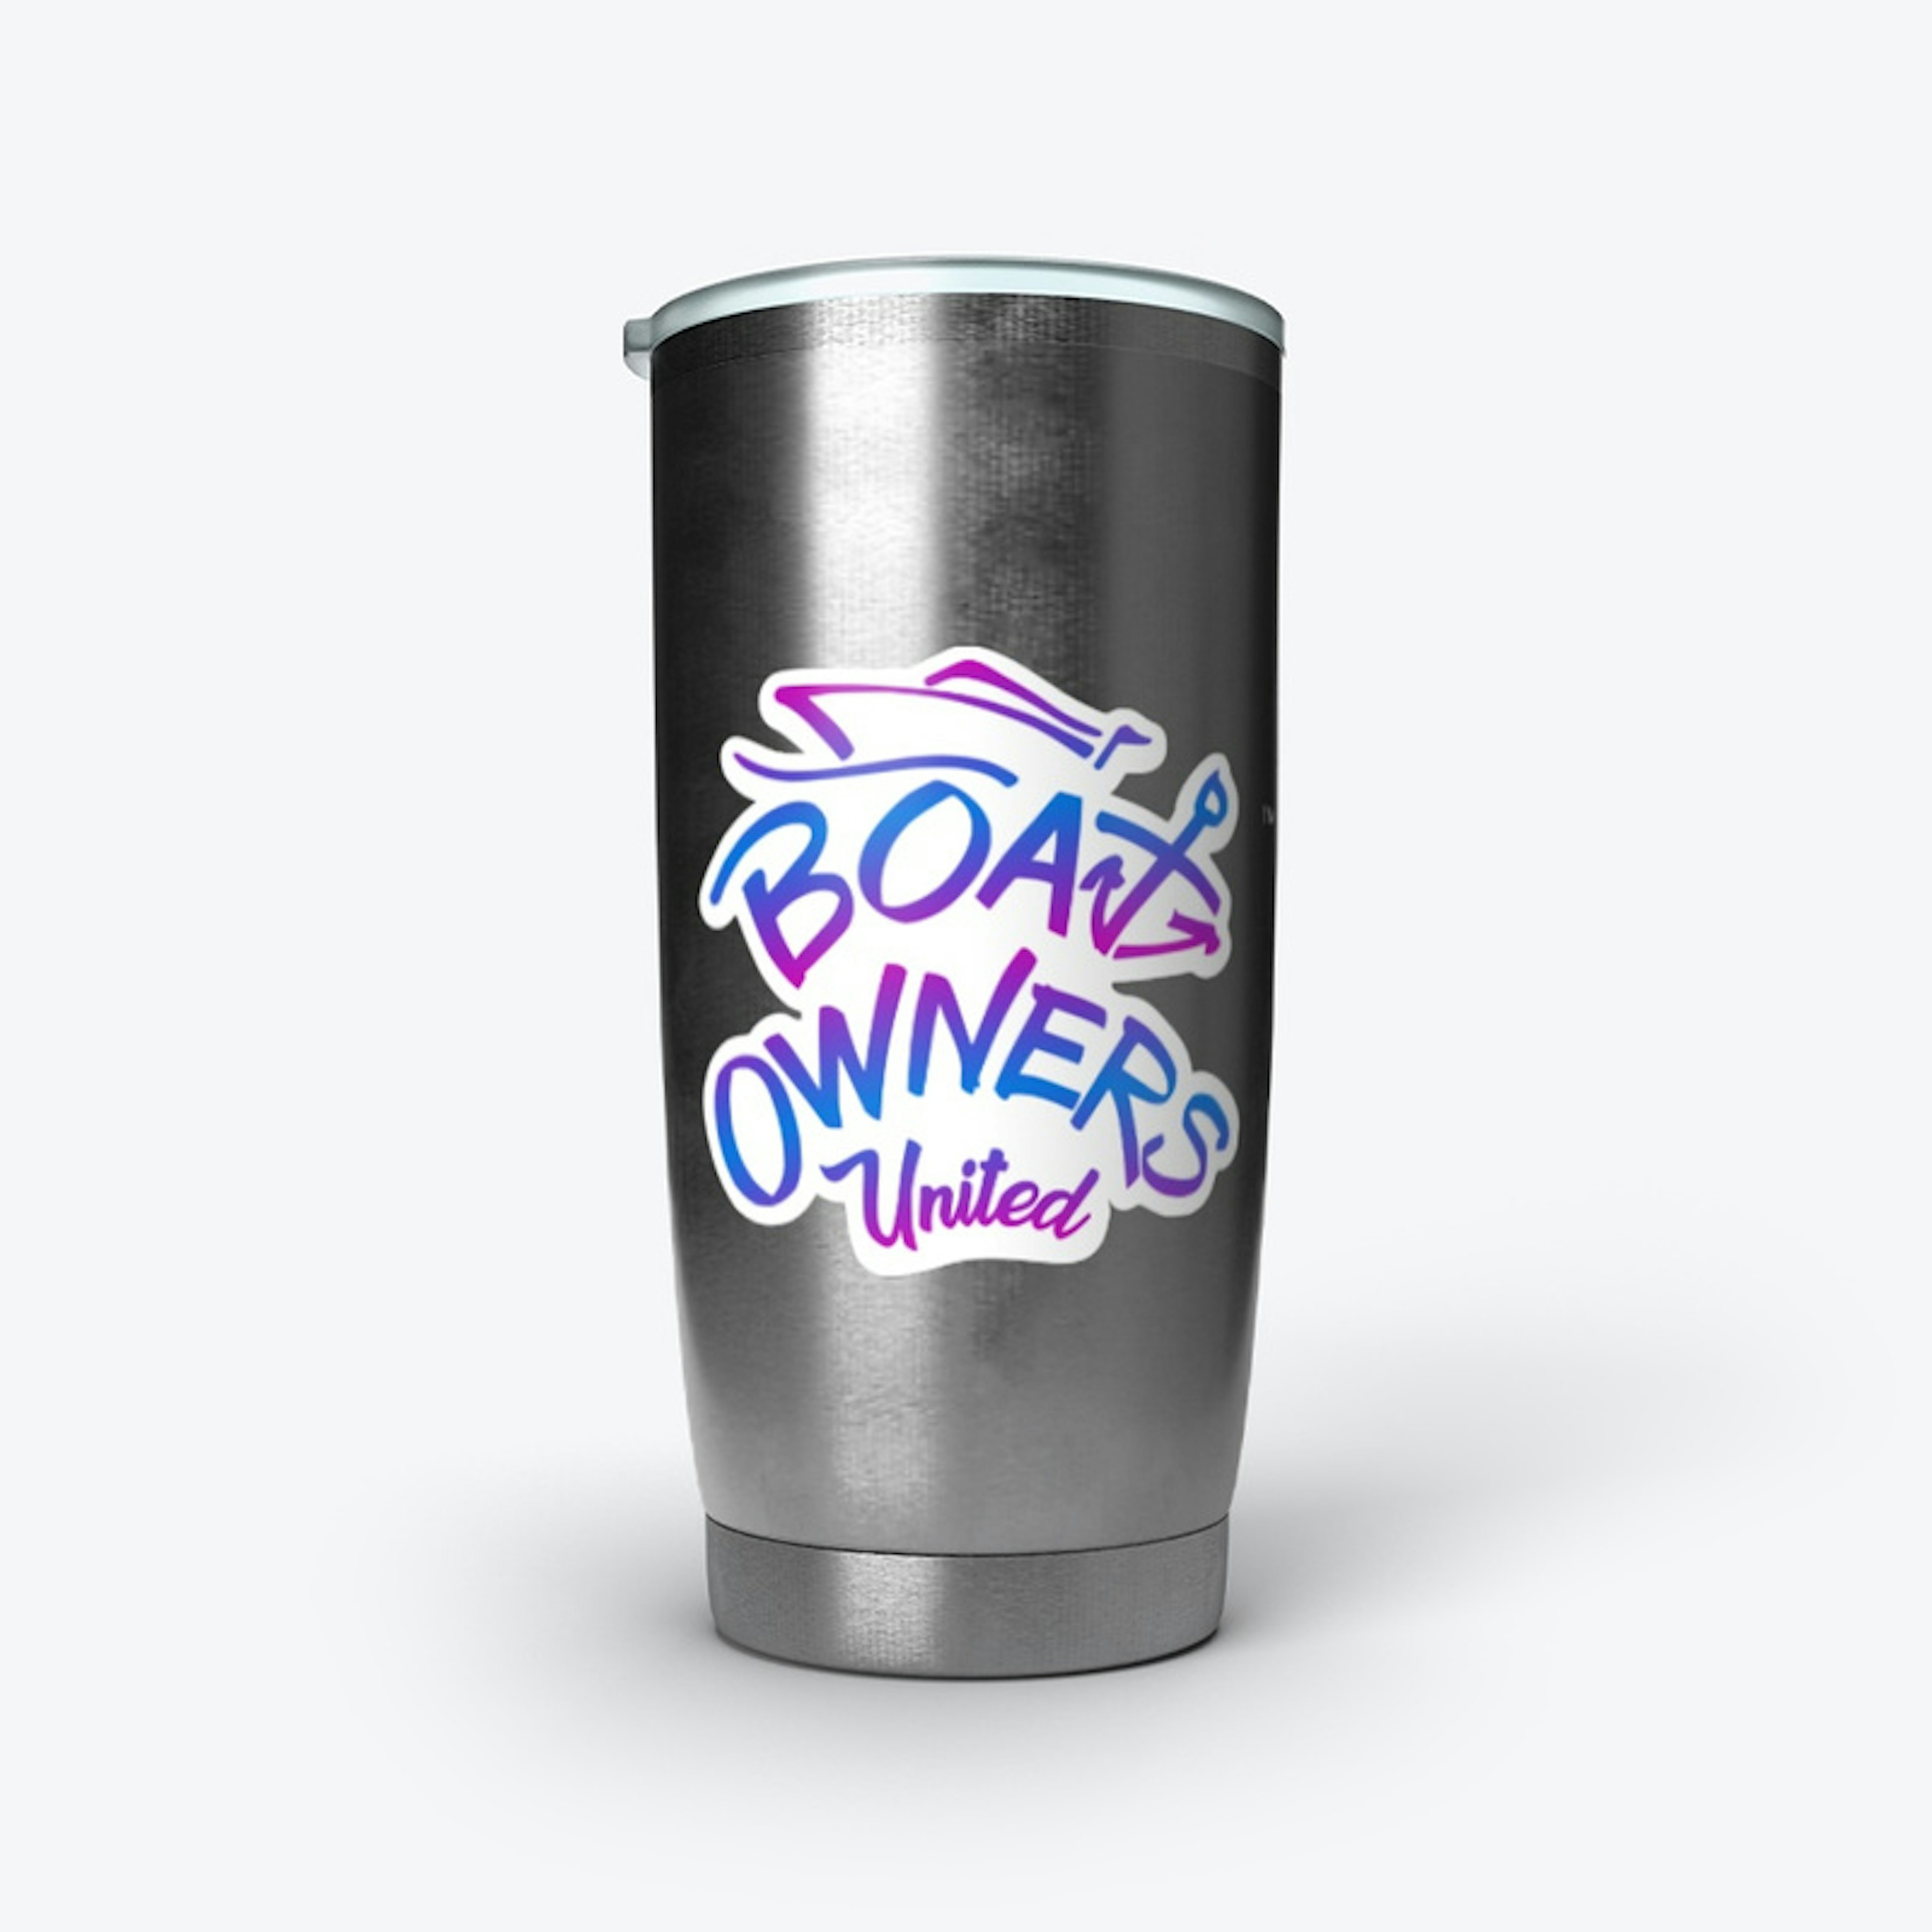 Boat Owners United - SS Tumbler